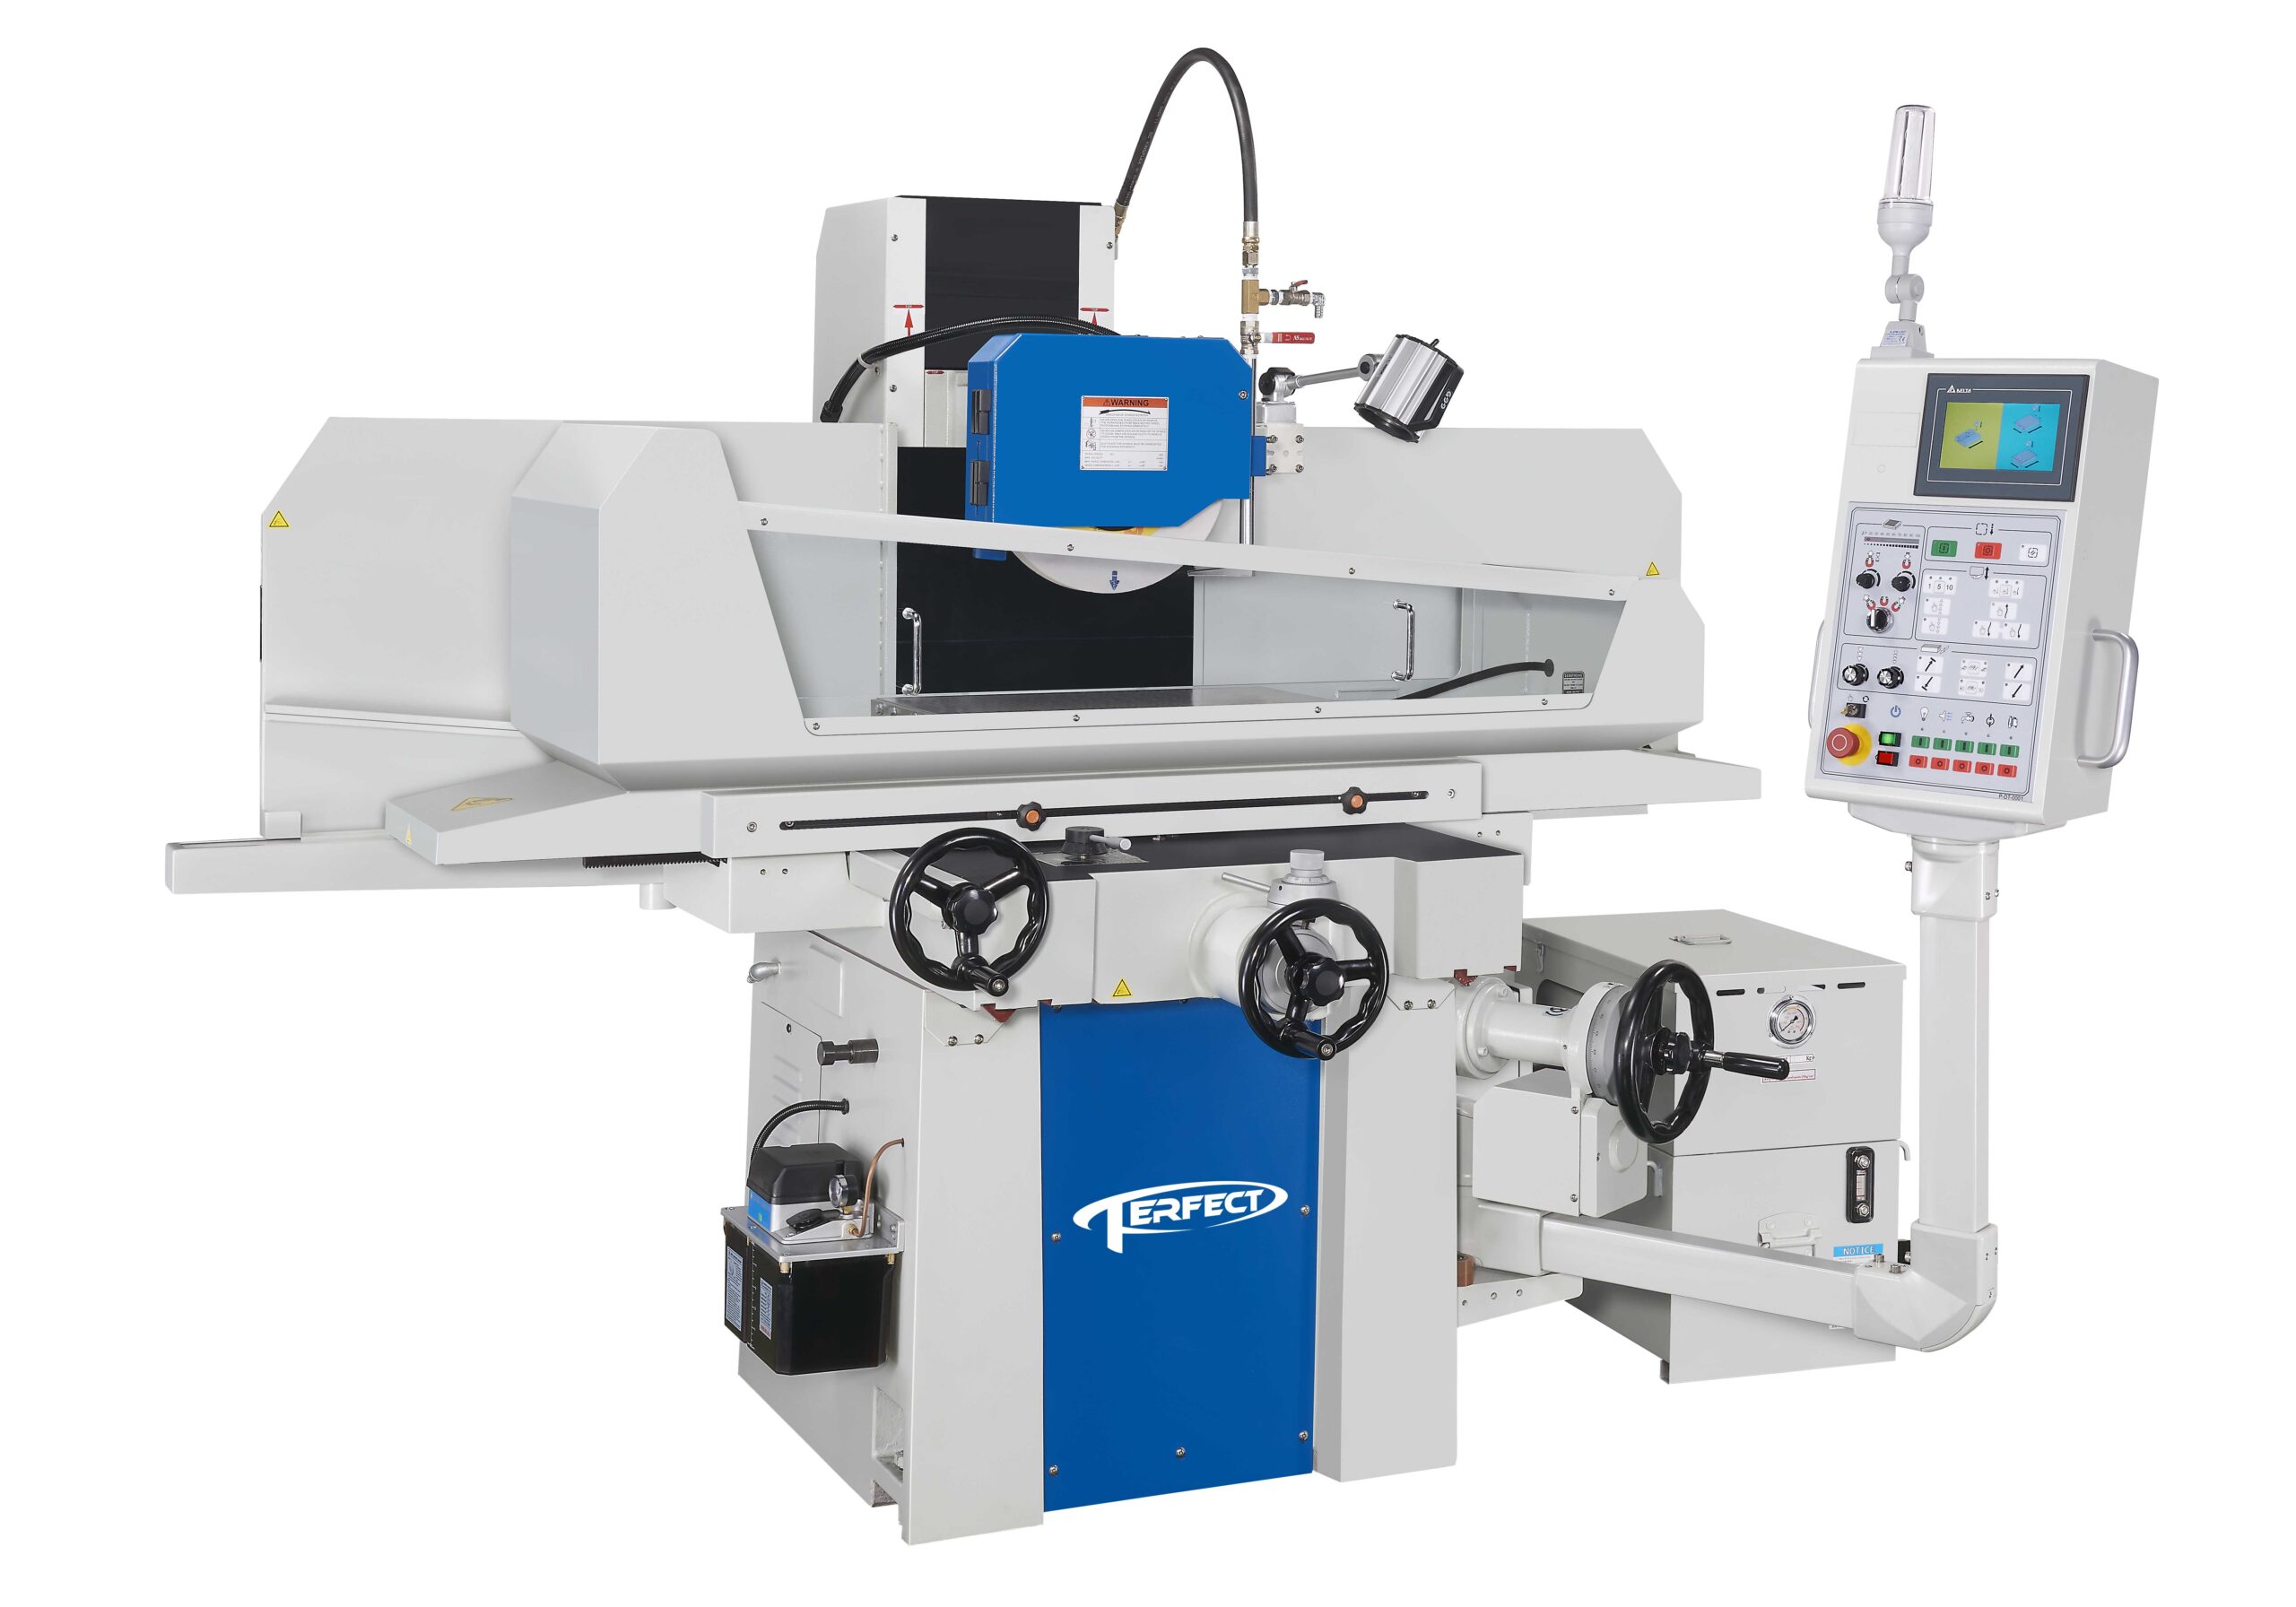 PERFECT PFG-3060DT with 300 x 600mm grinidng capacity